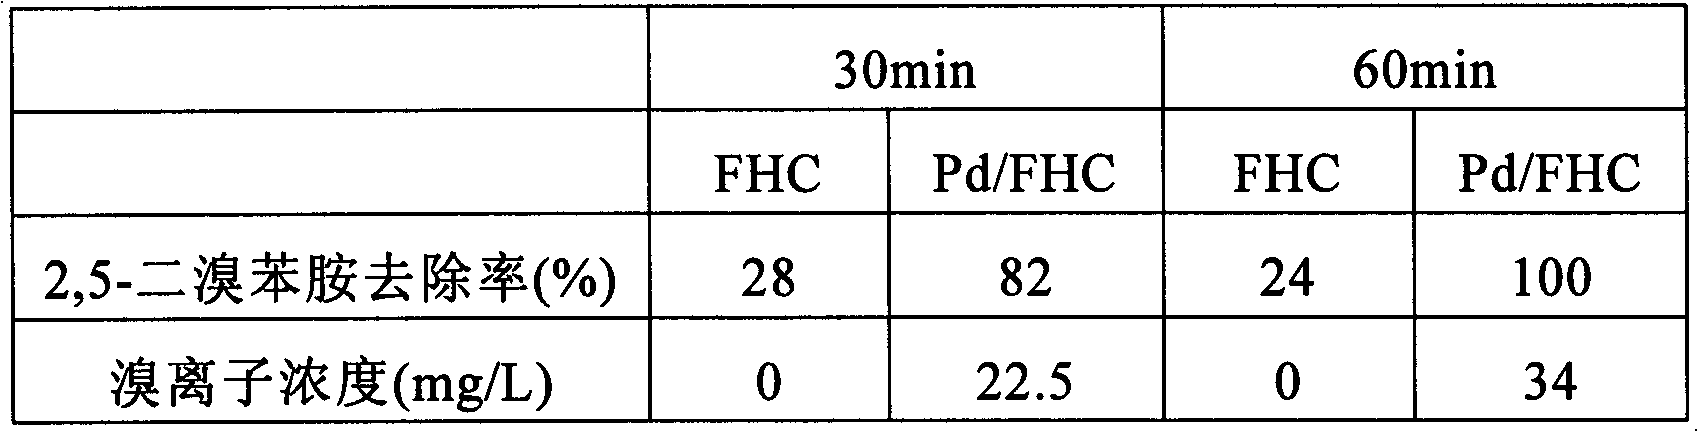 Method for removing pollutant in water by palladium-catalyzed polyhydroxy ferrous-reduced method